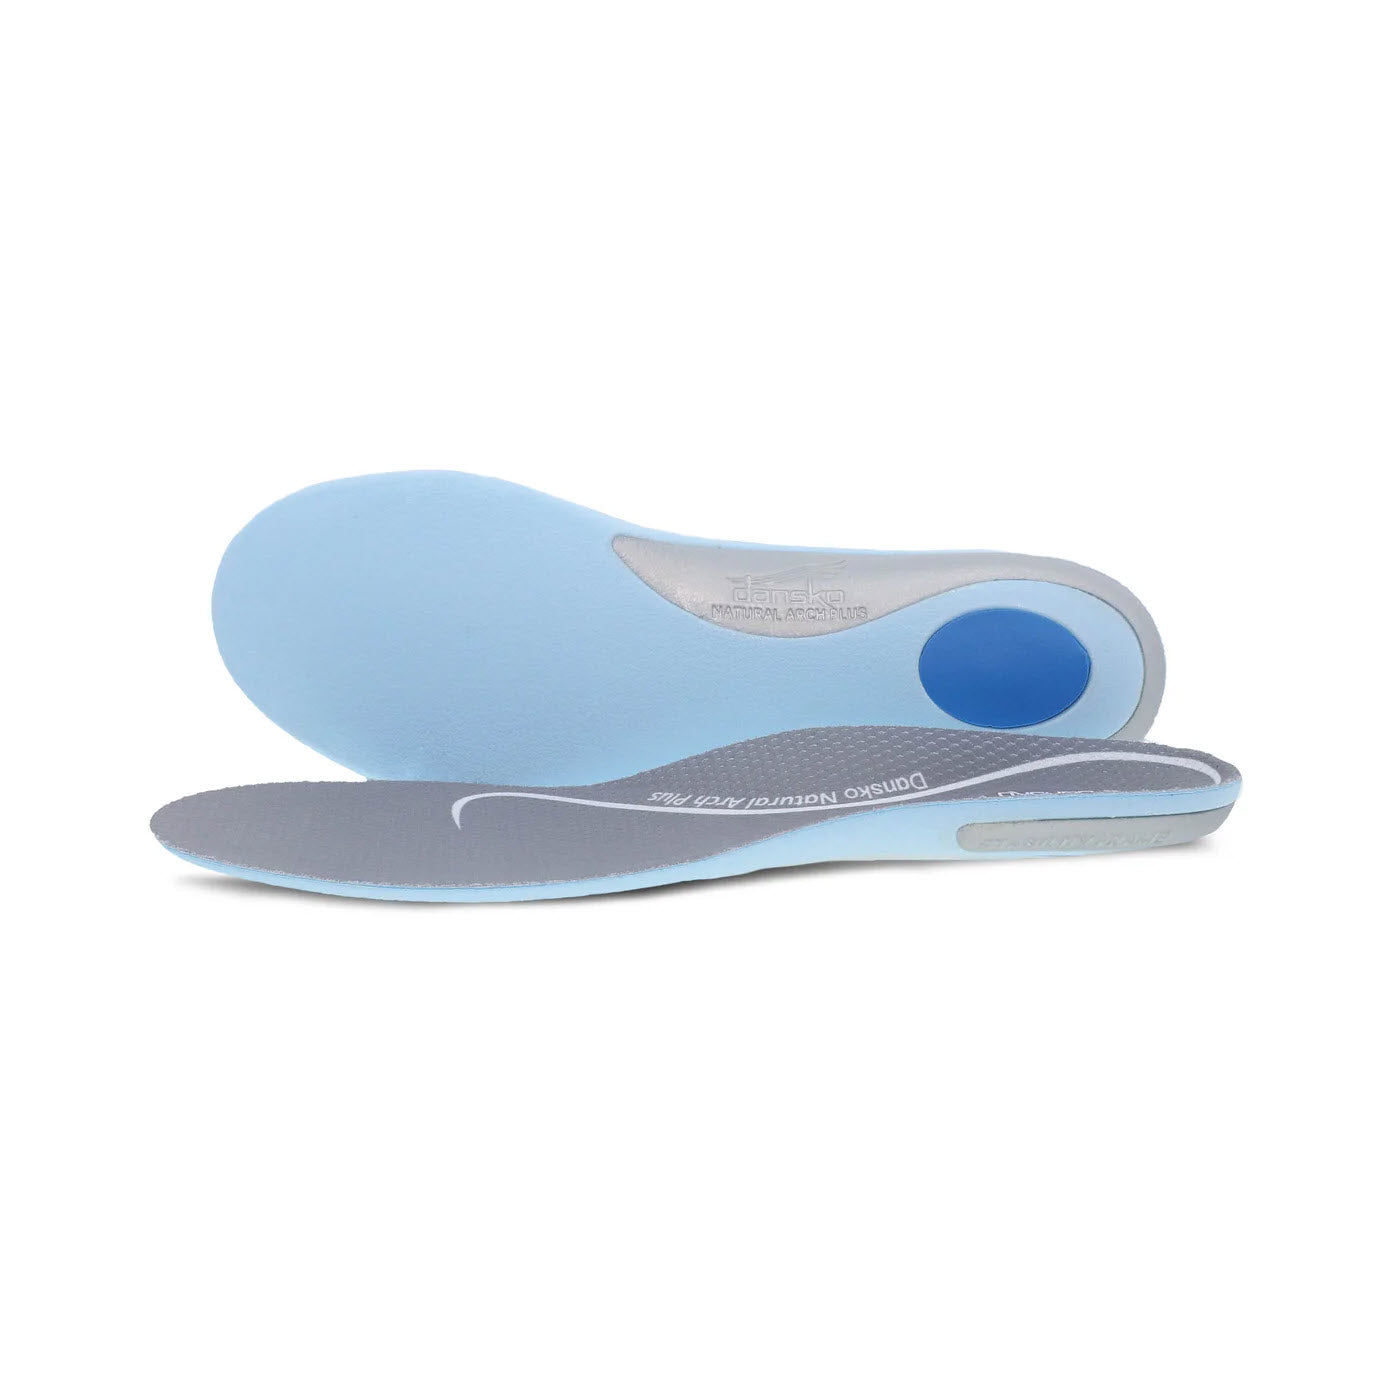 A pair of Dansko Footbed Active All Day Comfort orthotic shoe insoles, blue and gray, designed for arch support with anti-microbial conditioning, displayed against a white background.